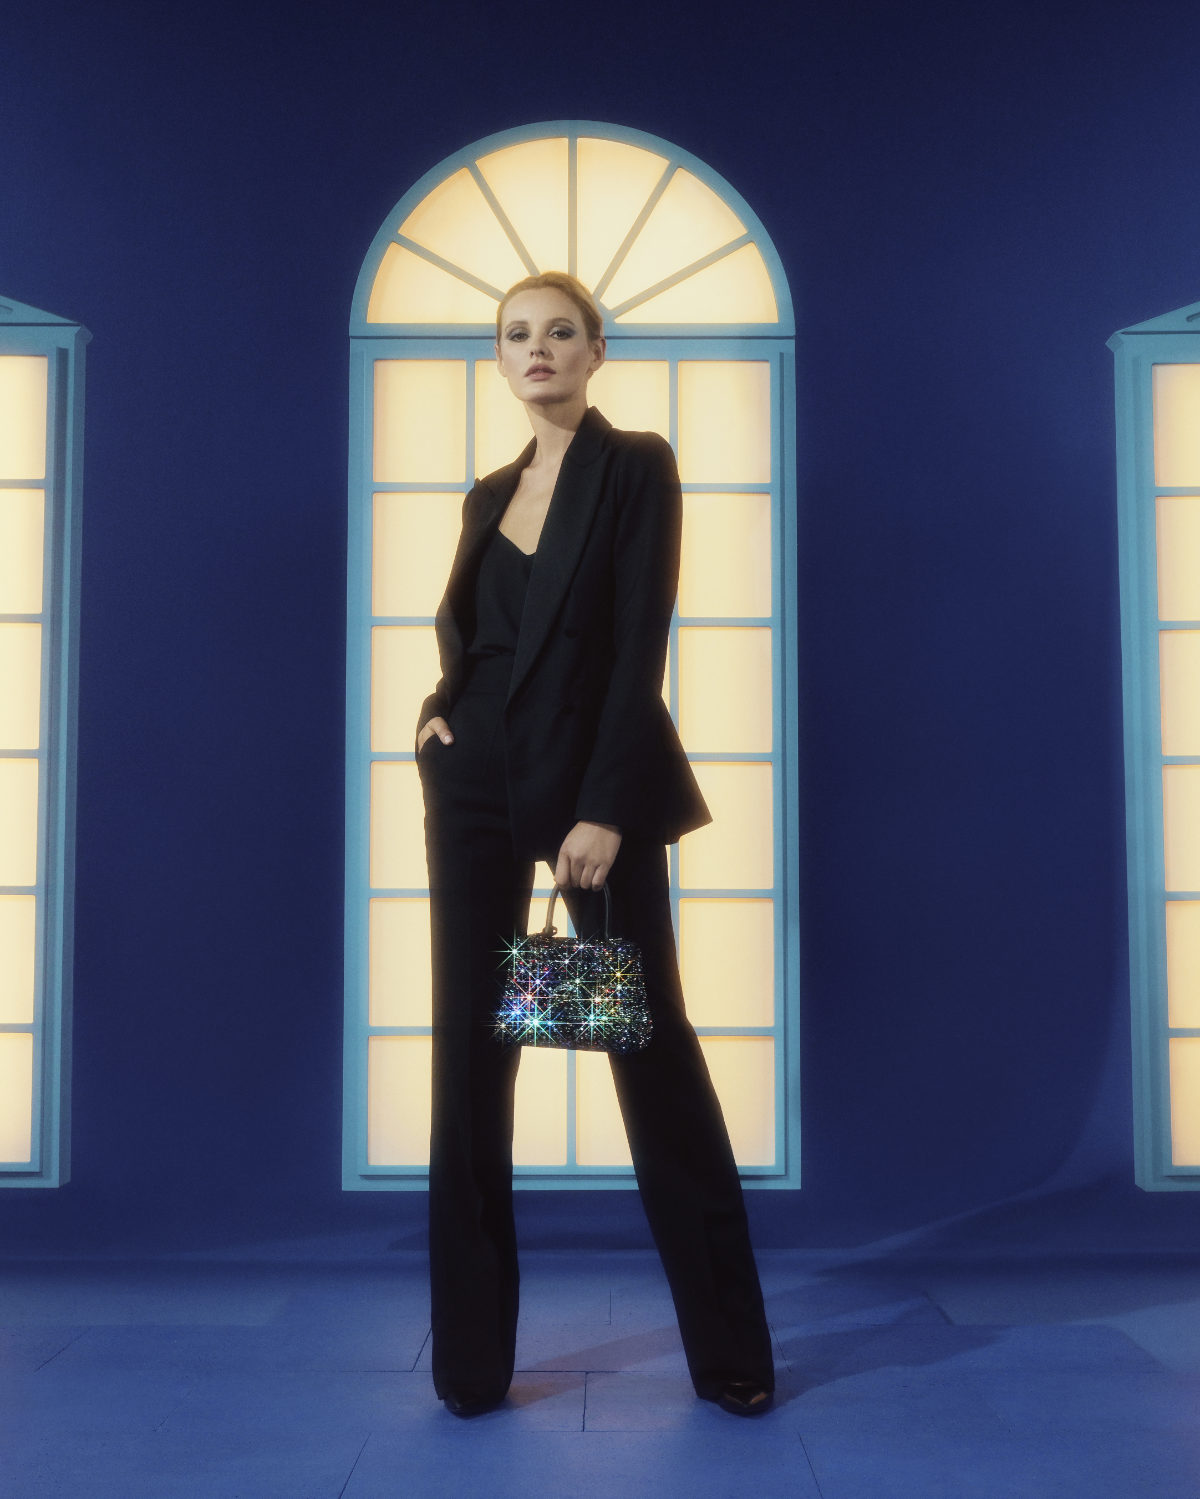 Delvaux Presents Its New Brilliant Celebrations Collection